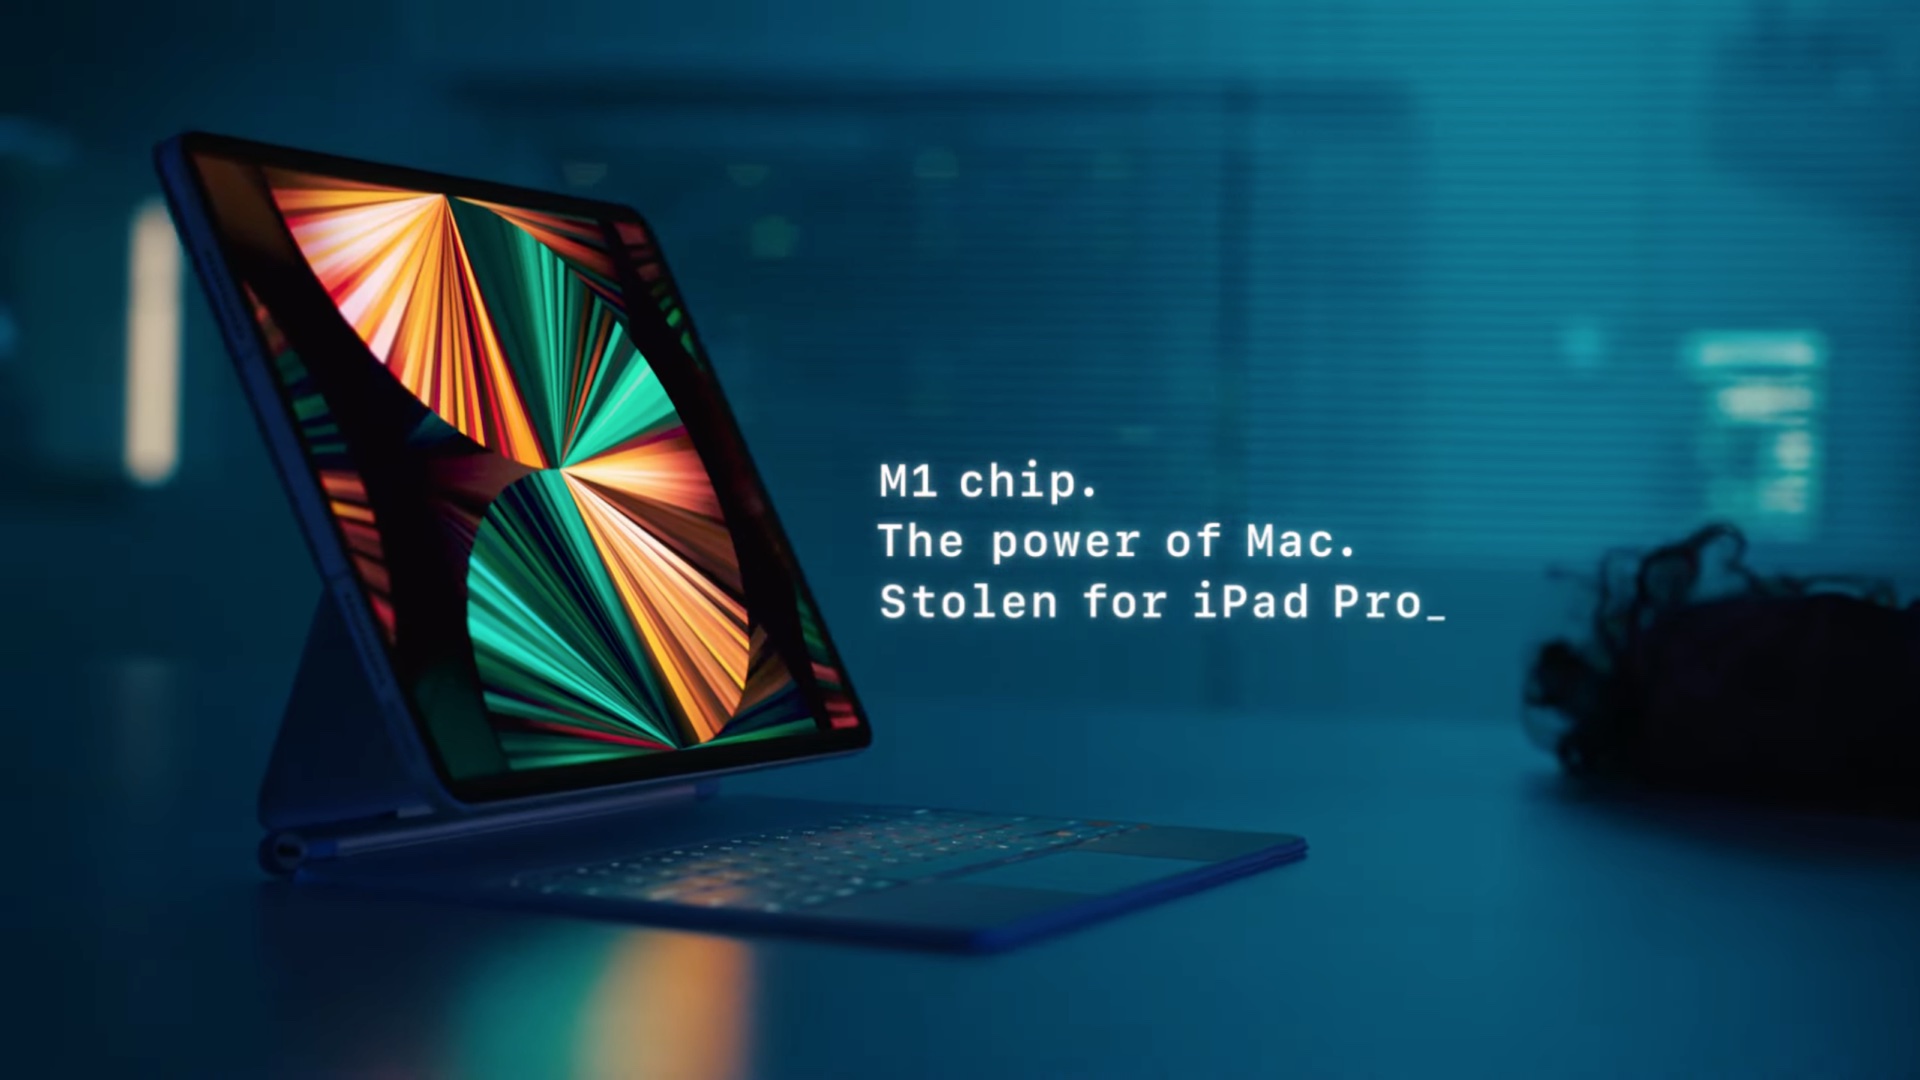 A still image grabbed from the closing scene of Apple's video advertisement featuring an iPad Pro with a Magic Keyboard sitting on a desk, with the tagline "M1 chip. The power of Mac. Stolen for iPad Pro" displayed in white font